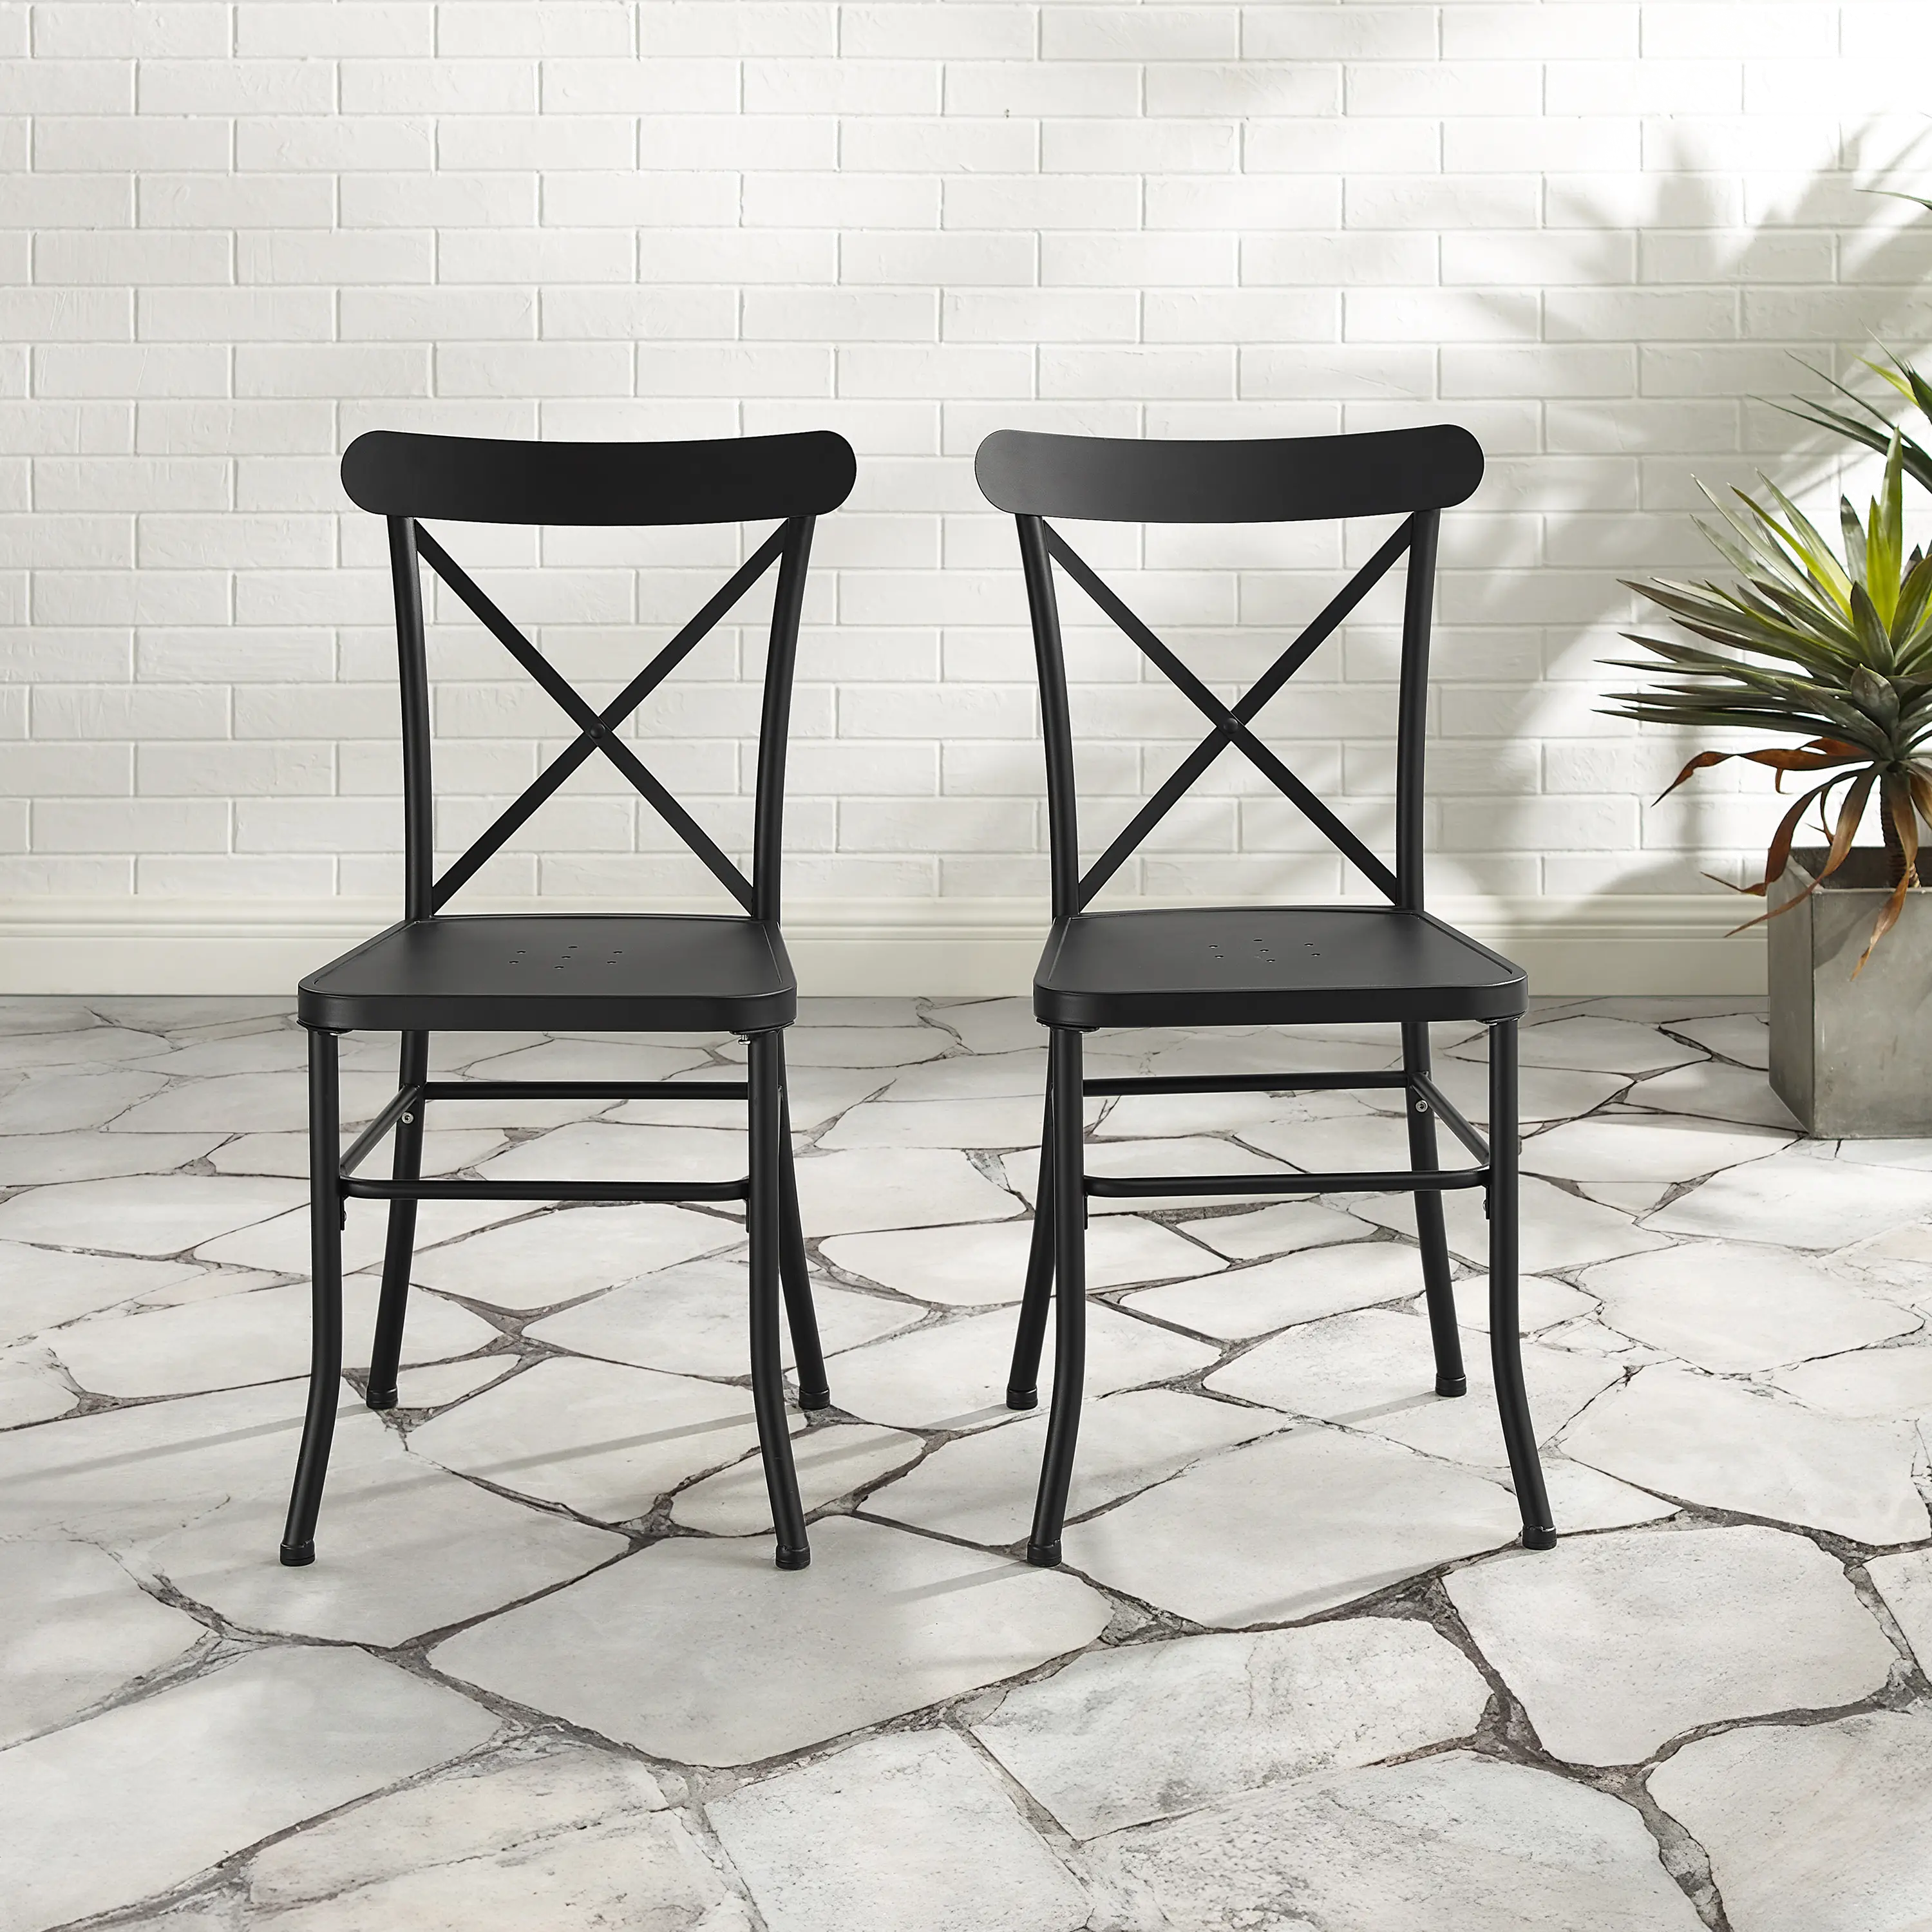 Astrid Black Metal Patio Dining Chairs, Set of 2